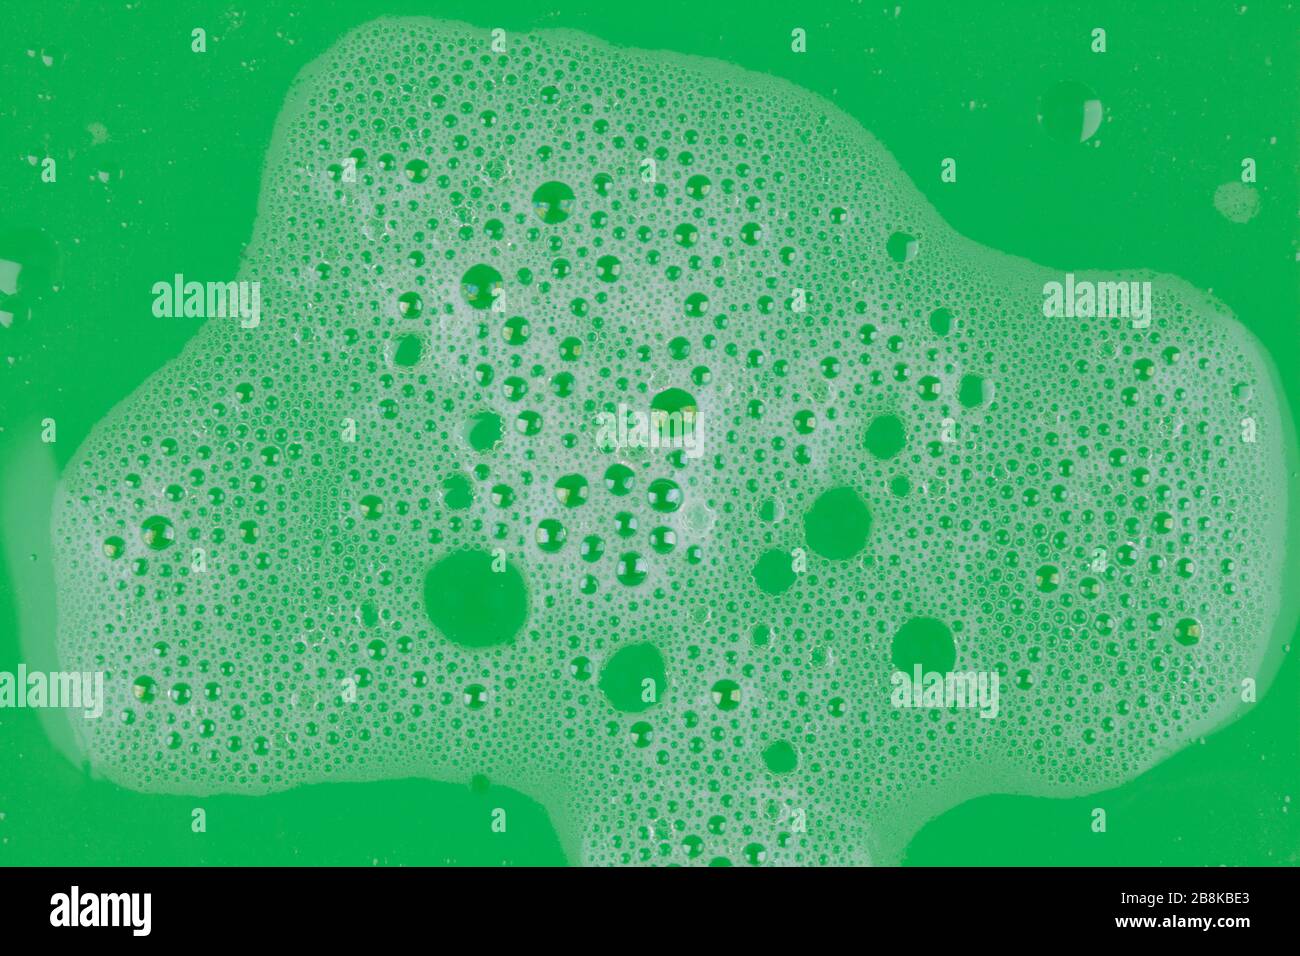 Abstract background white soapy foam texture on green background. Shampoo foam with bubbles Stock Photo